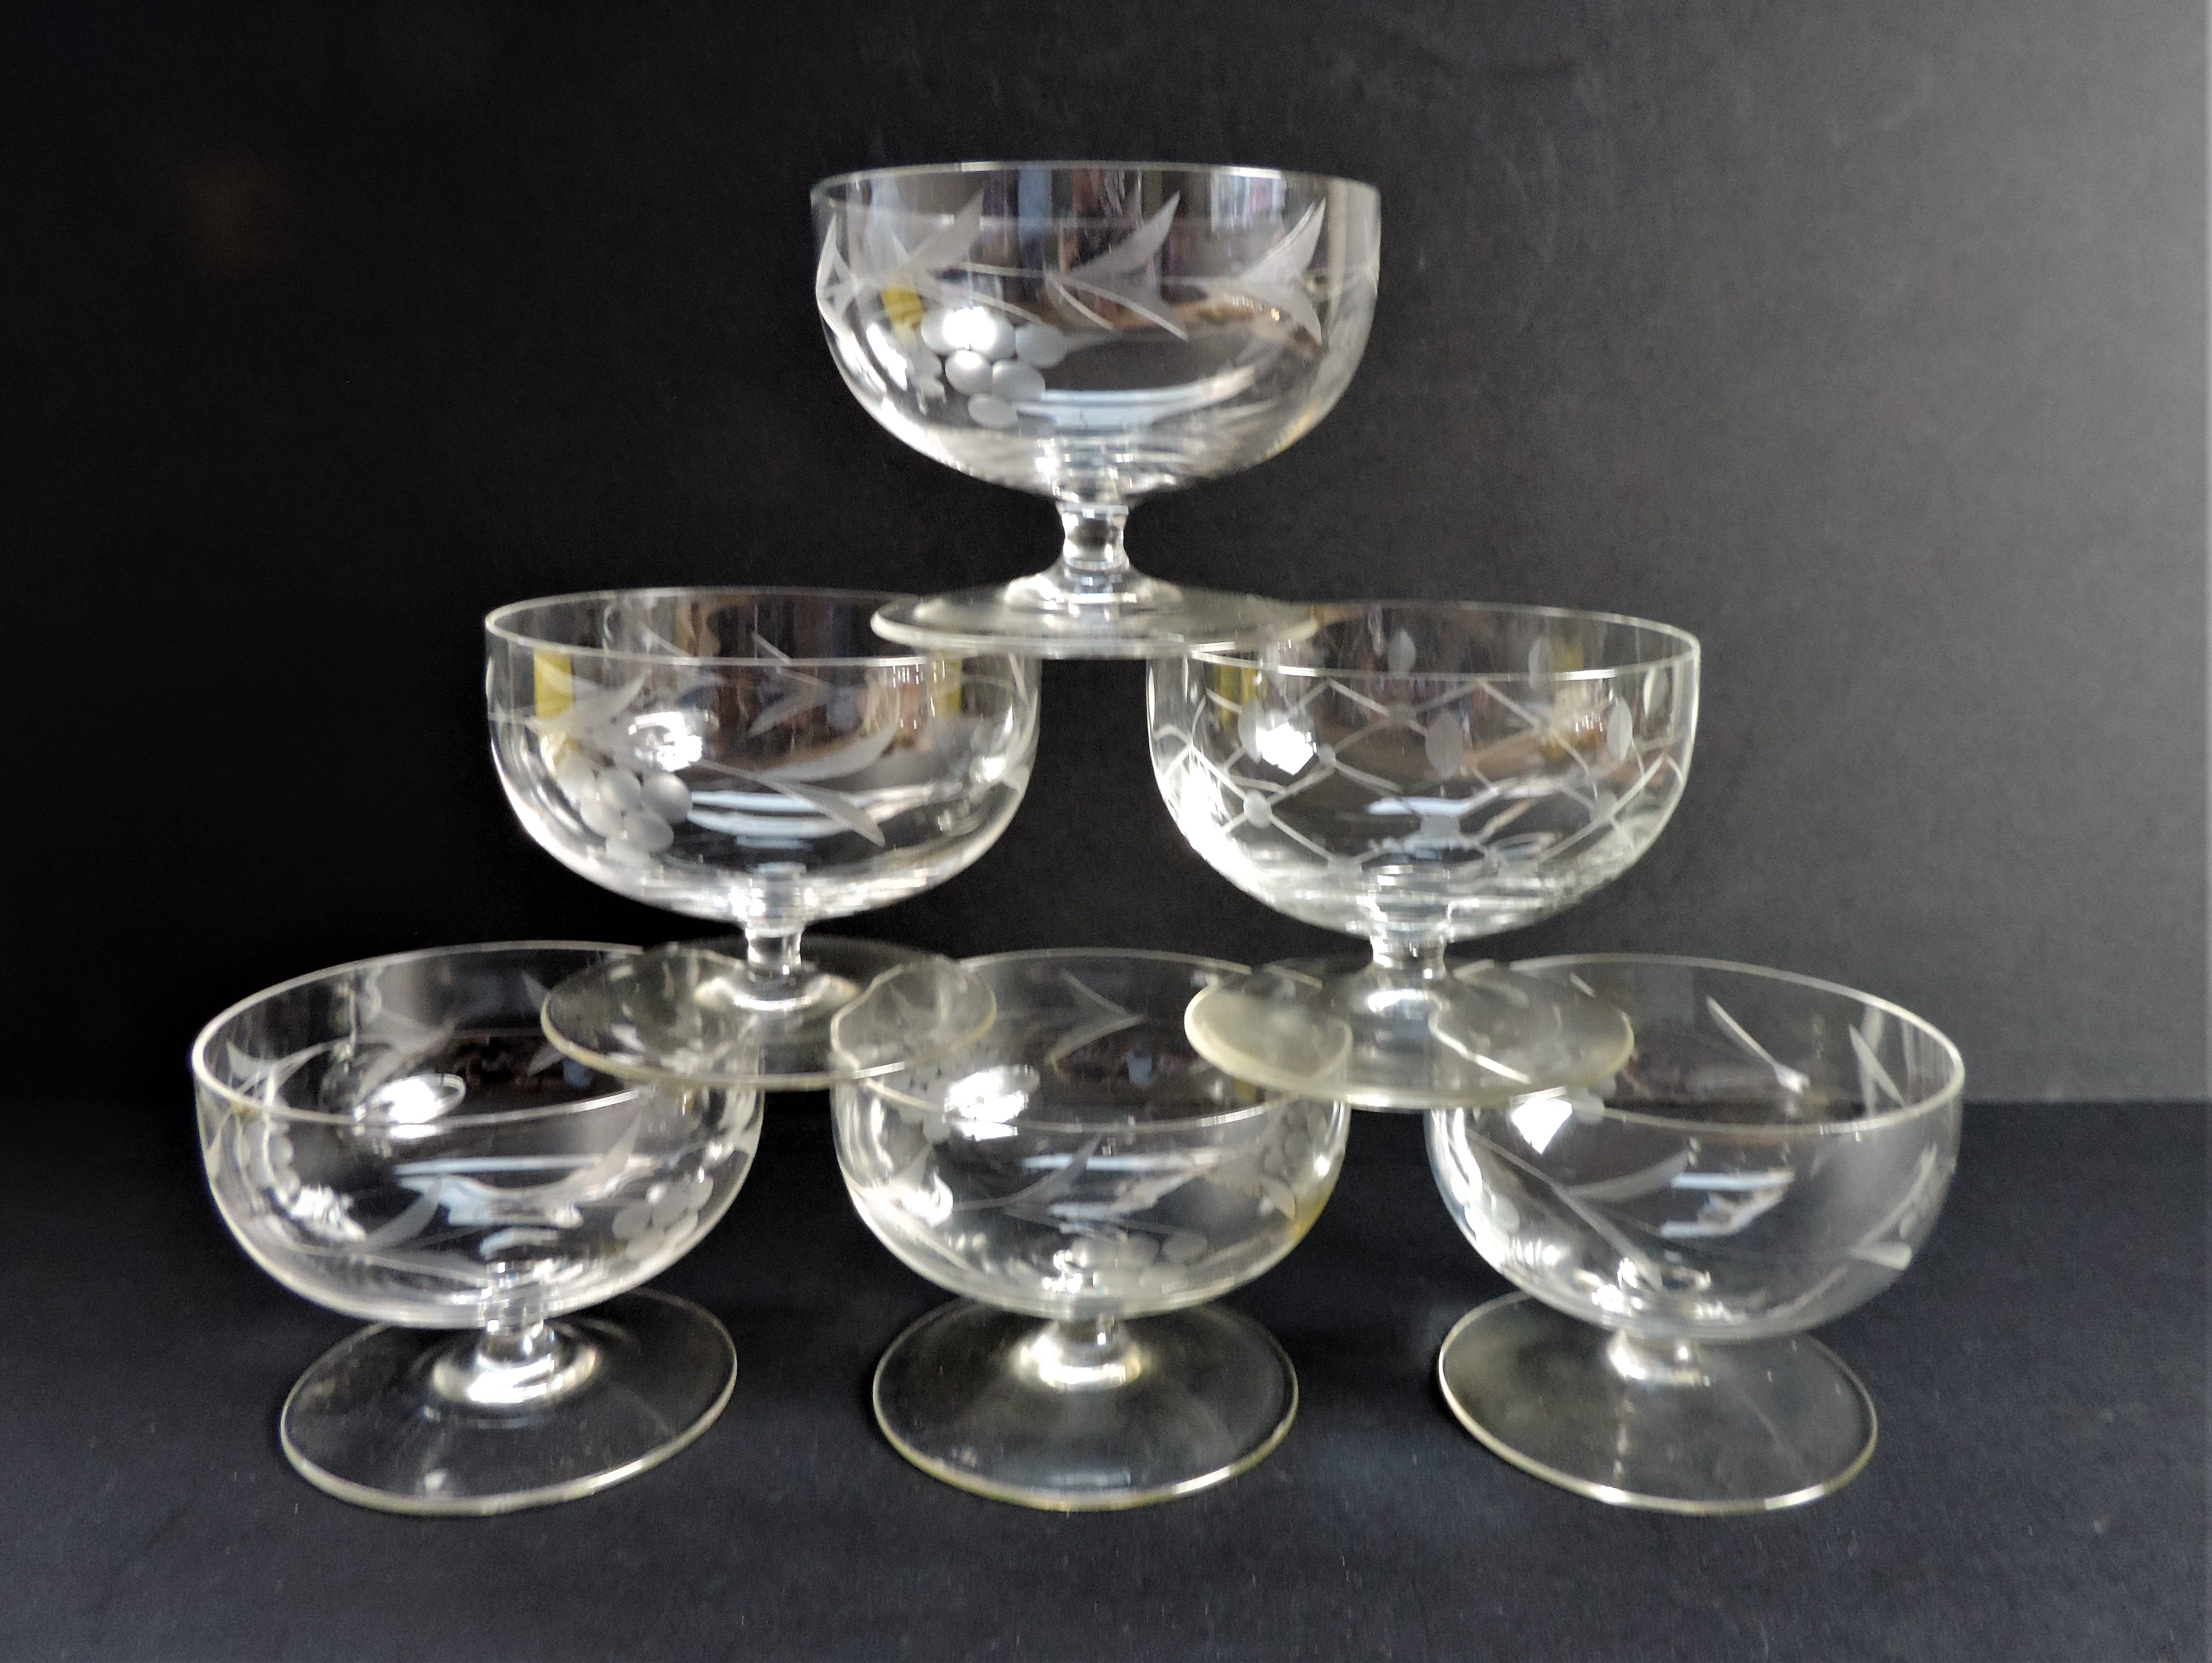 Antique Etched Glass Dessert/Ice Cream/Sorbet Dishes